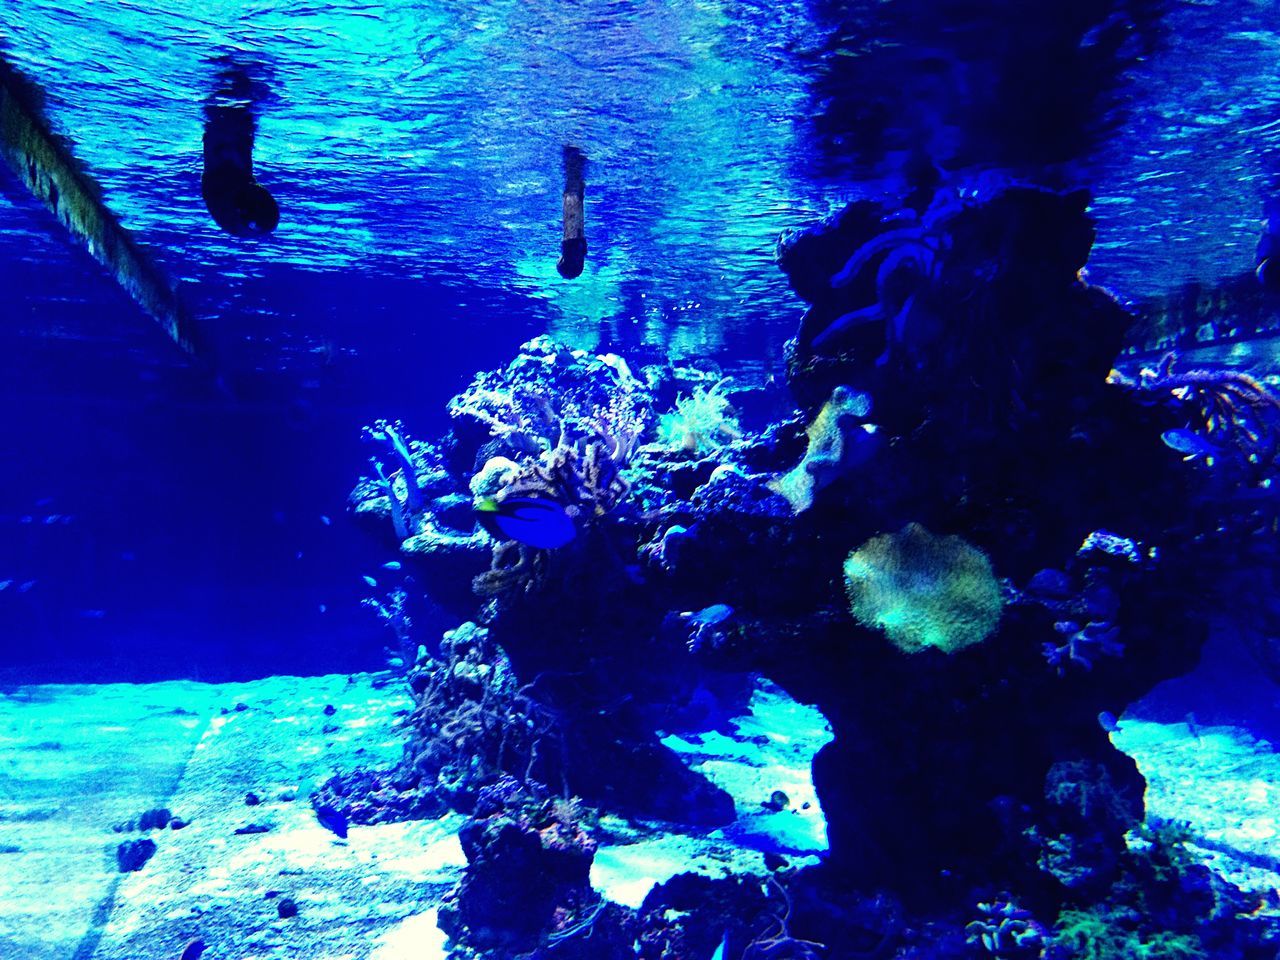 underwater, water, blue, undersea, swimming, sea life, sea, animal themes, beauty in nature, nature, rock - object, animals in the wild, fish, wildlife, school of fish, coral, aquarium, high angle view, rock formation